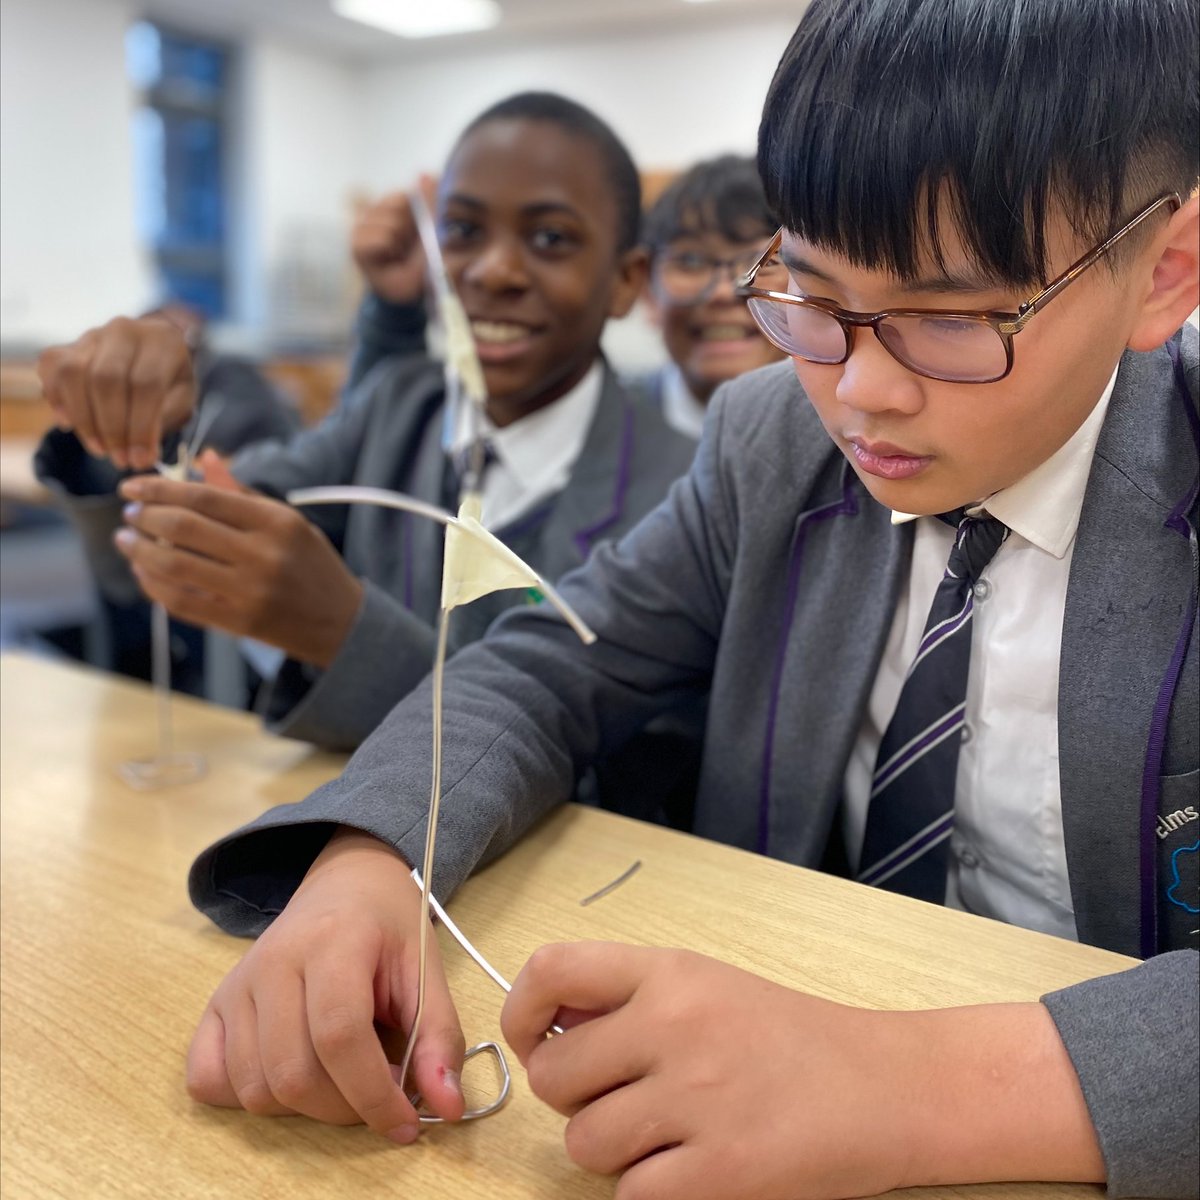 This week we saw the launch of our KS3 Enrichment programme. Every single student in Y7-9 has the opportunity to engage in an exciting activity ranging from Masterchefs, STEM club, Choir, Art for Action and Young Entrepreneurs #educationwithcharacter #enrichment @UnitedLearning